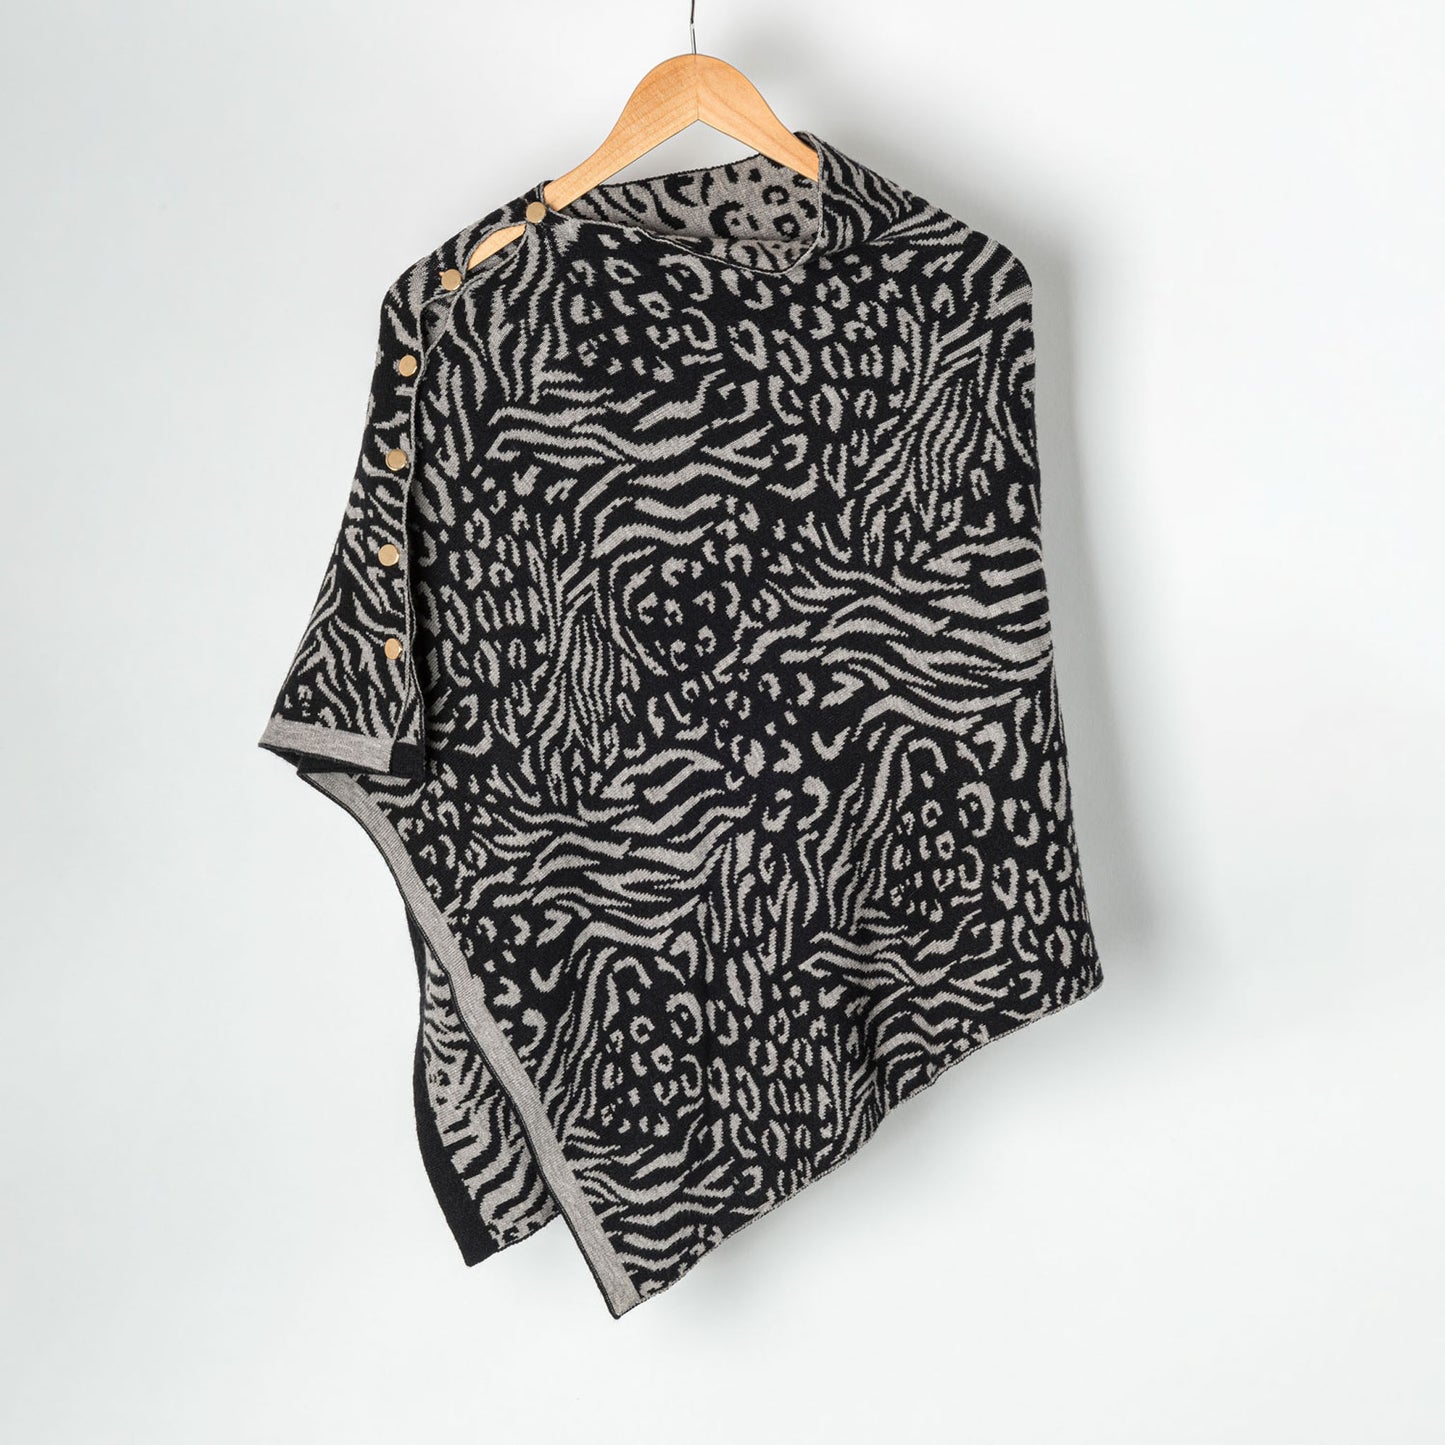 Animal Print Reversible Poncho with Gold Button Accents